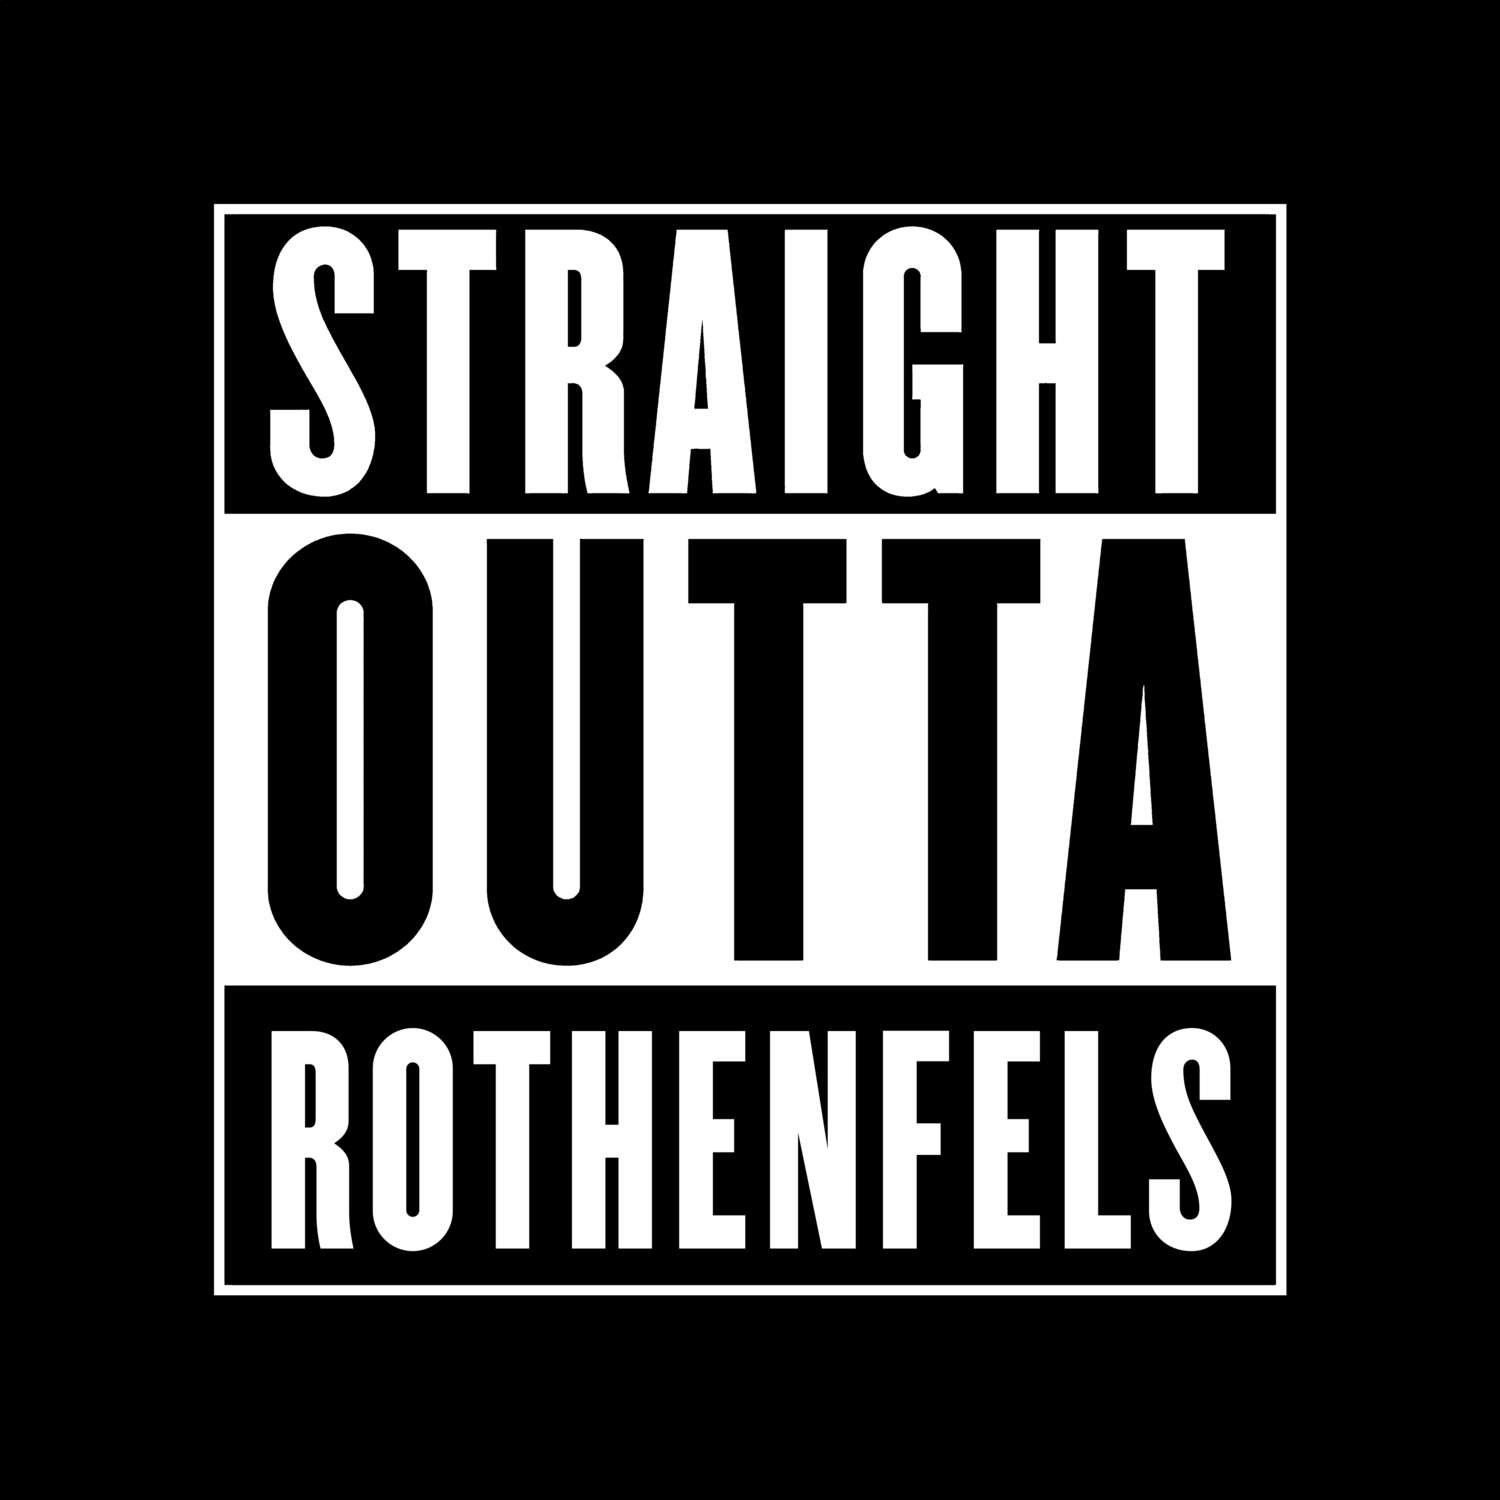 Rothenfels T-Shirt »Straight Outta«